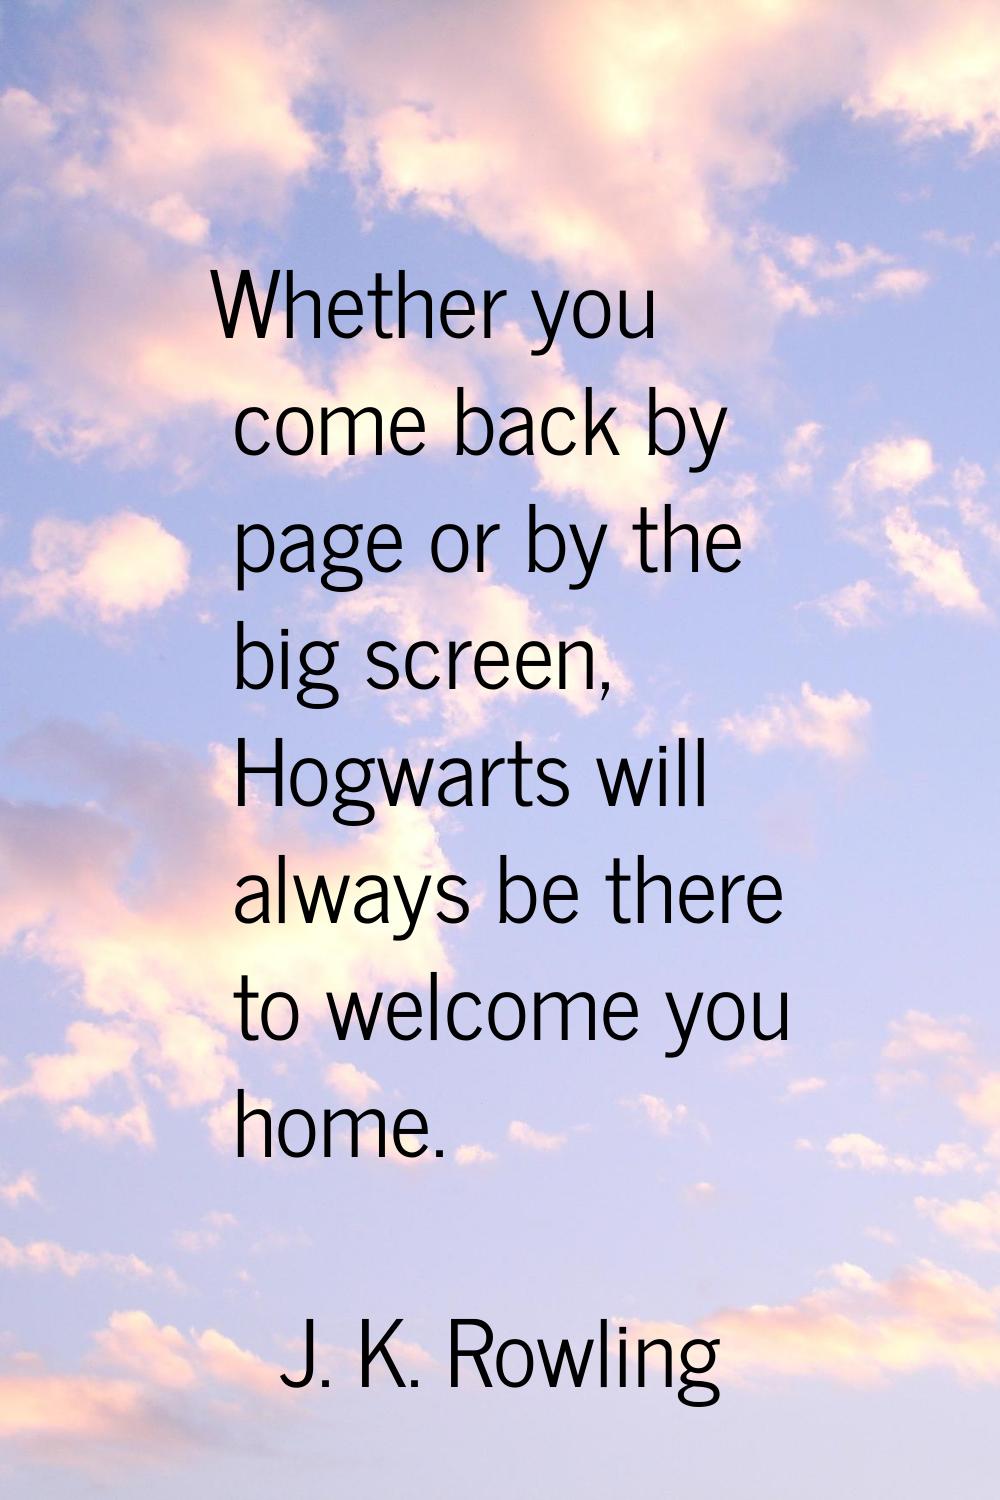 Whether you come back by page or by the big screen, Hogwarts will always be there to welcome you ho